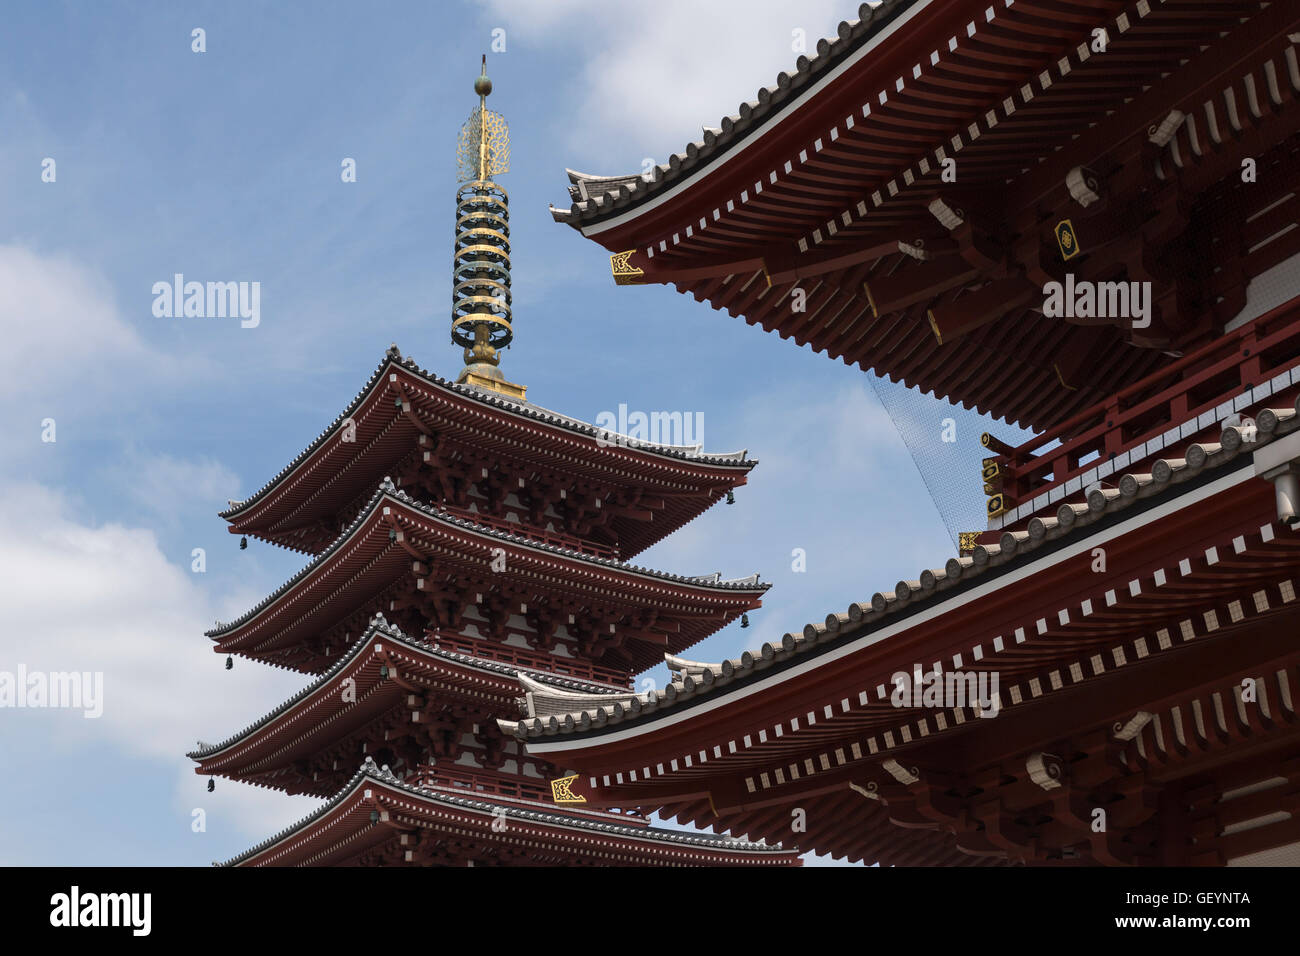 View on the pagoda and the roof of the main gate at the senso-ji temple in Tokyo, Japan. Stock Photo